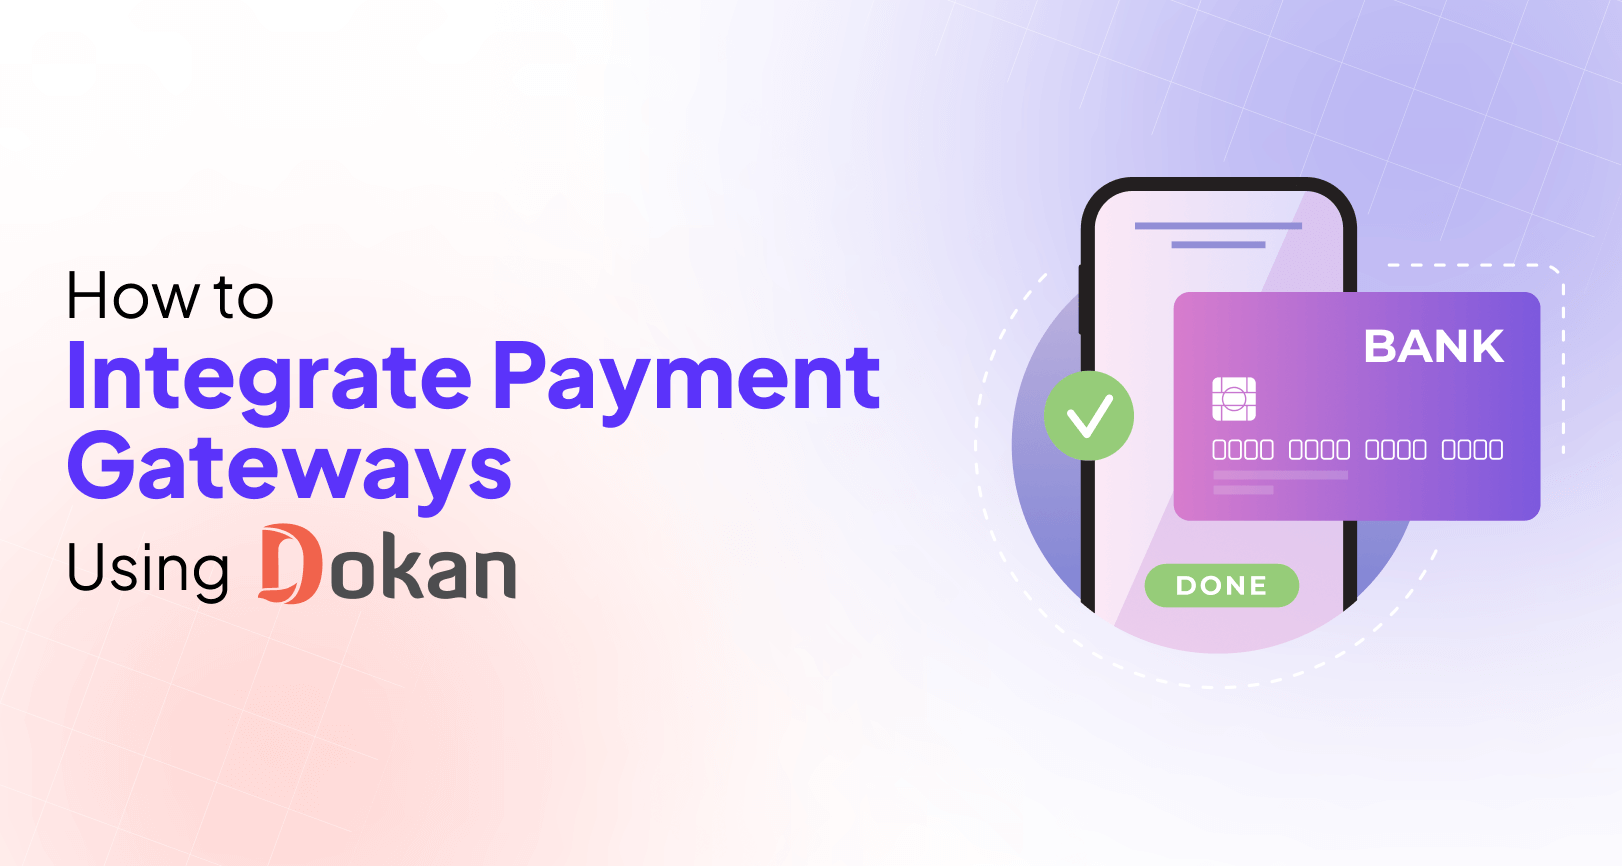 How to Integrate Payment Gateways Using Dokan